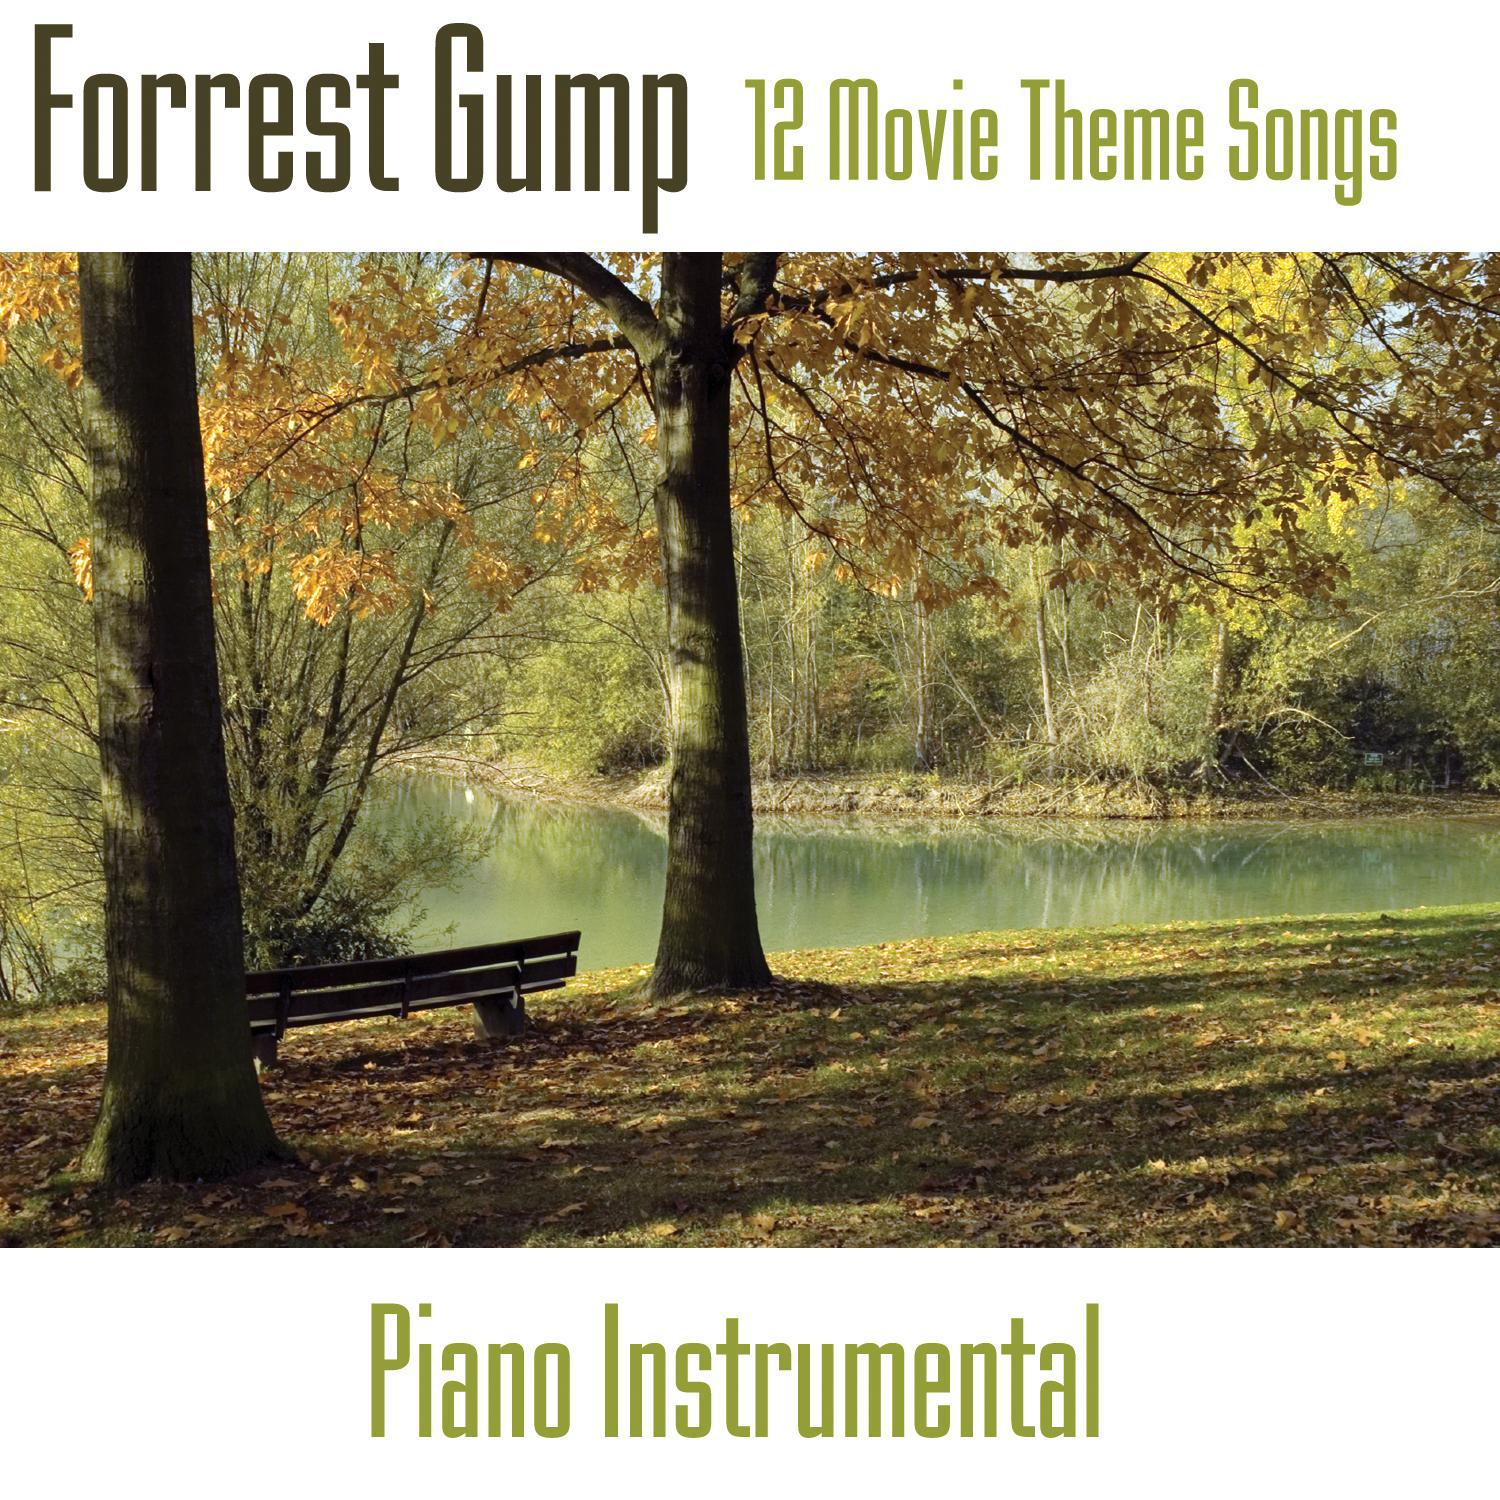 Forrest Gump - 12 Movie Theme Songs